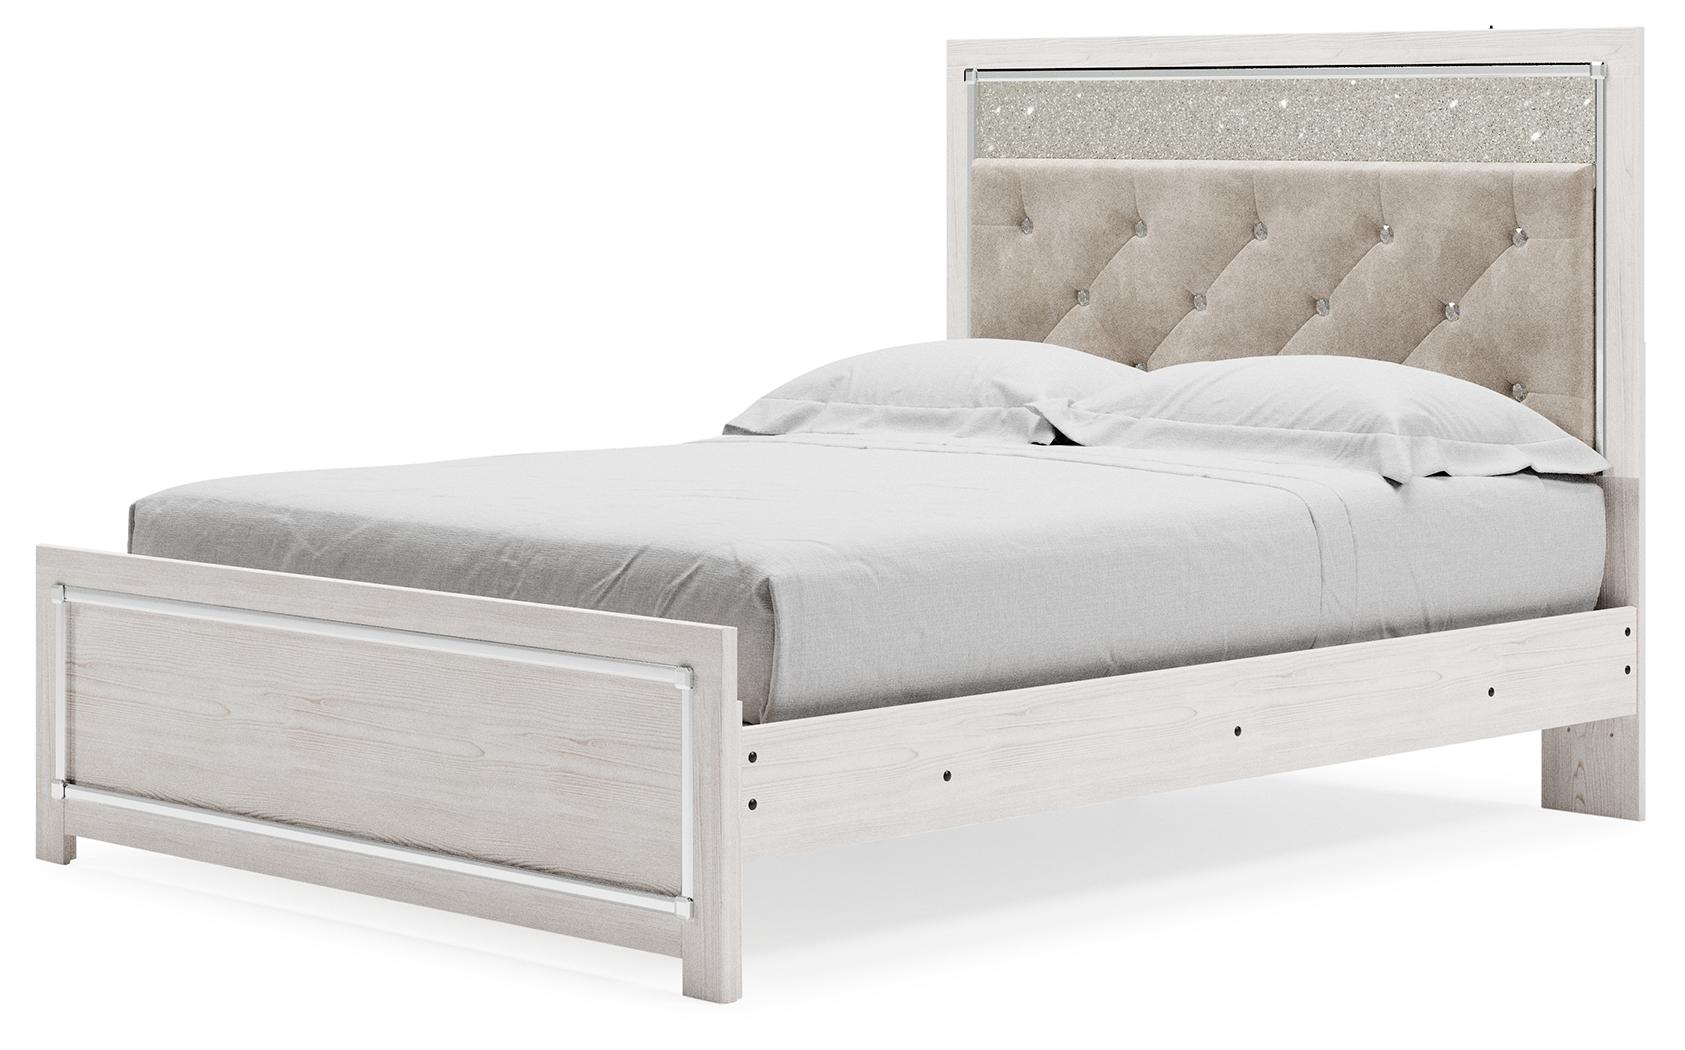 ASHLEY FURNITURE B2640B2 Altyra Queen Panel Bed